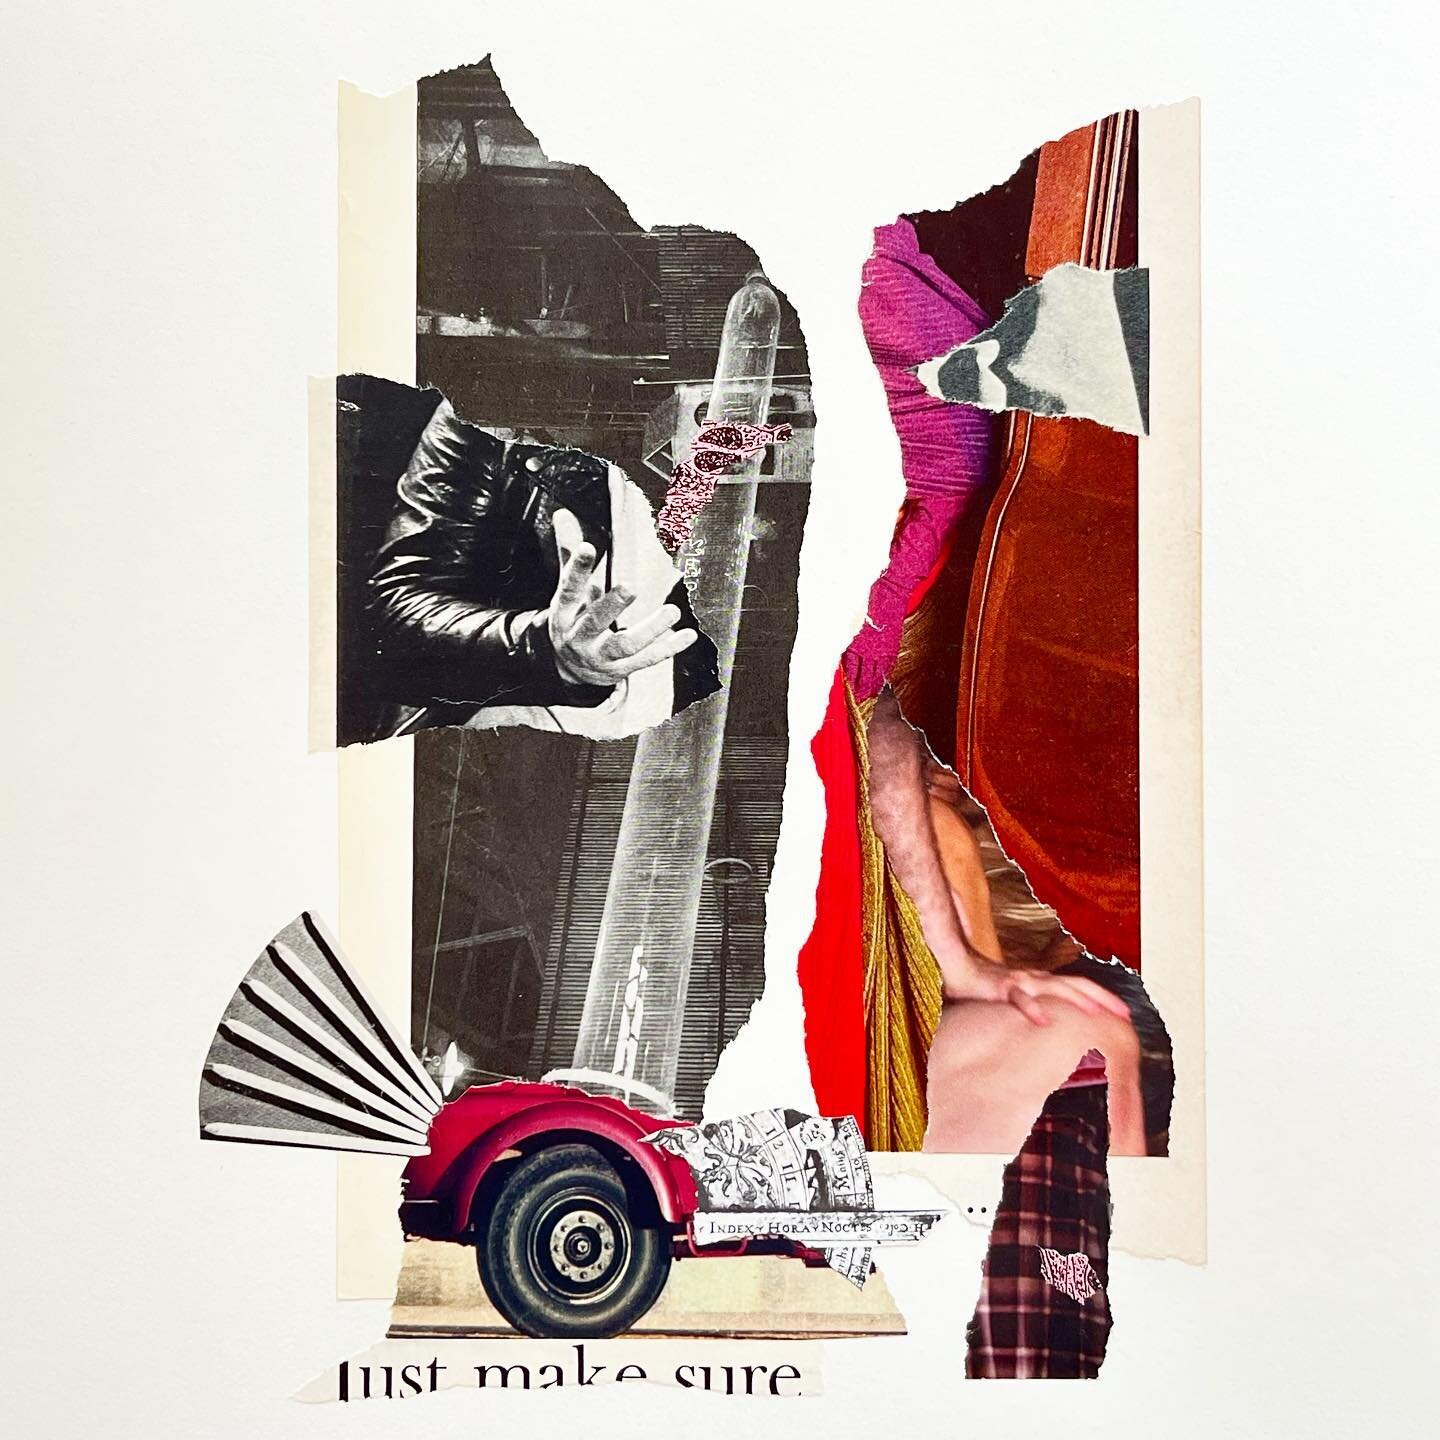 &lsquo;Backseat romance&rsquo;
&mdash; caress your screen knowingly for close-ups
&mdash; #backseat #romance #handmade #hand #cut #upcycled #paper #collage #art #collageart #collageartist #kunst #collagecommunity #collagecollective #contemporaryart #